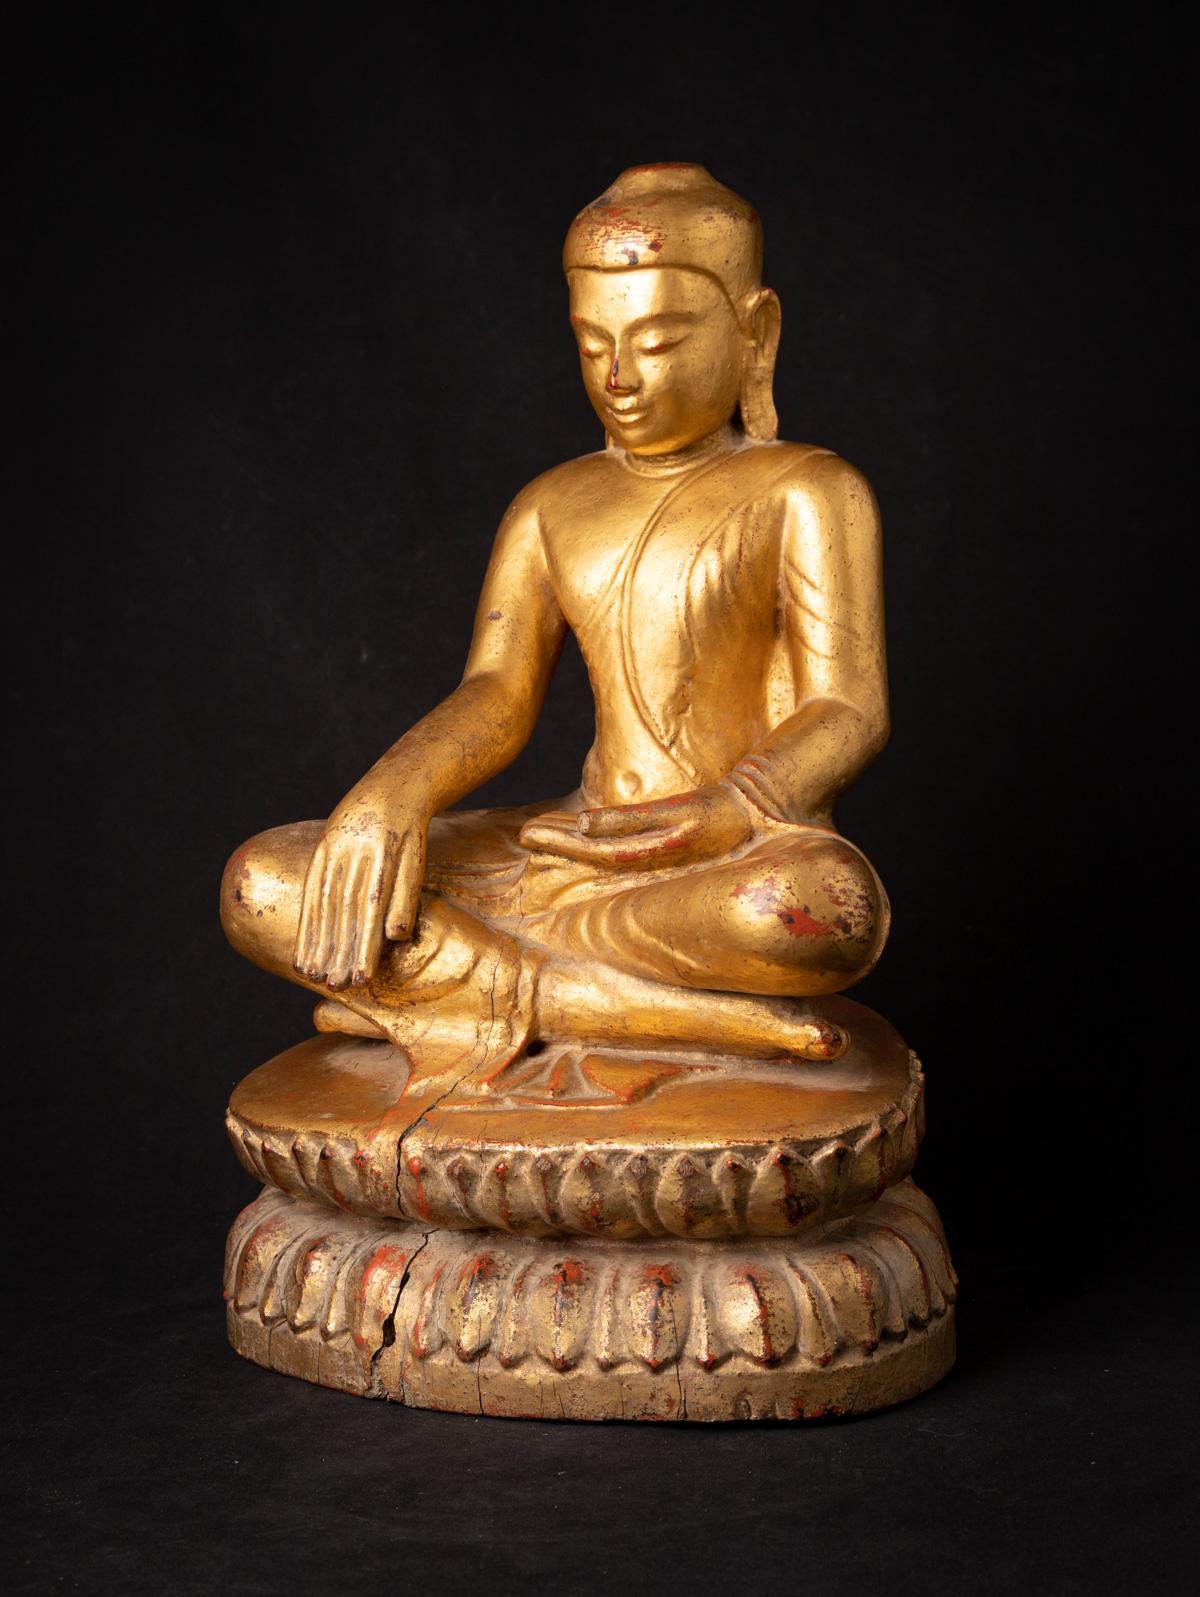 The special antique wooden Burmese Buddha statue stands as a testament to the timeless devotion and artistic brilliance of Burma's cultural legacy. Carved from wood, this exquisite statue rises to a height of 44.5 cm, with dimensions of 28.3 cm in